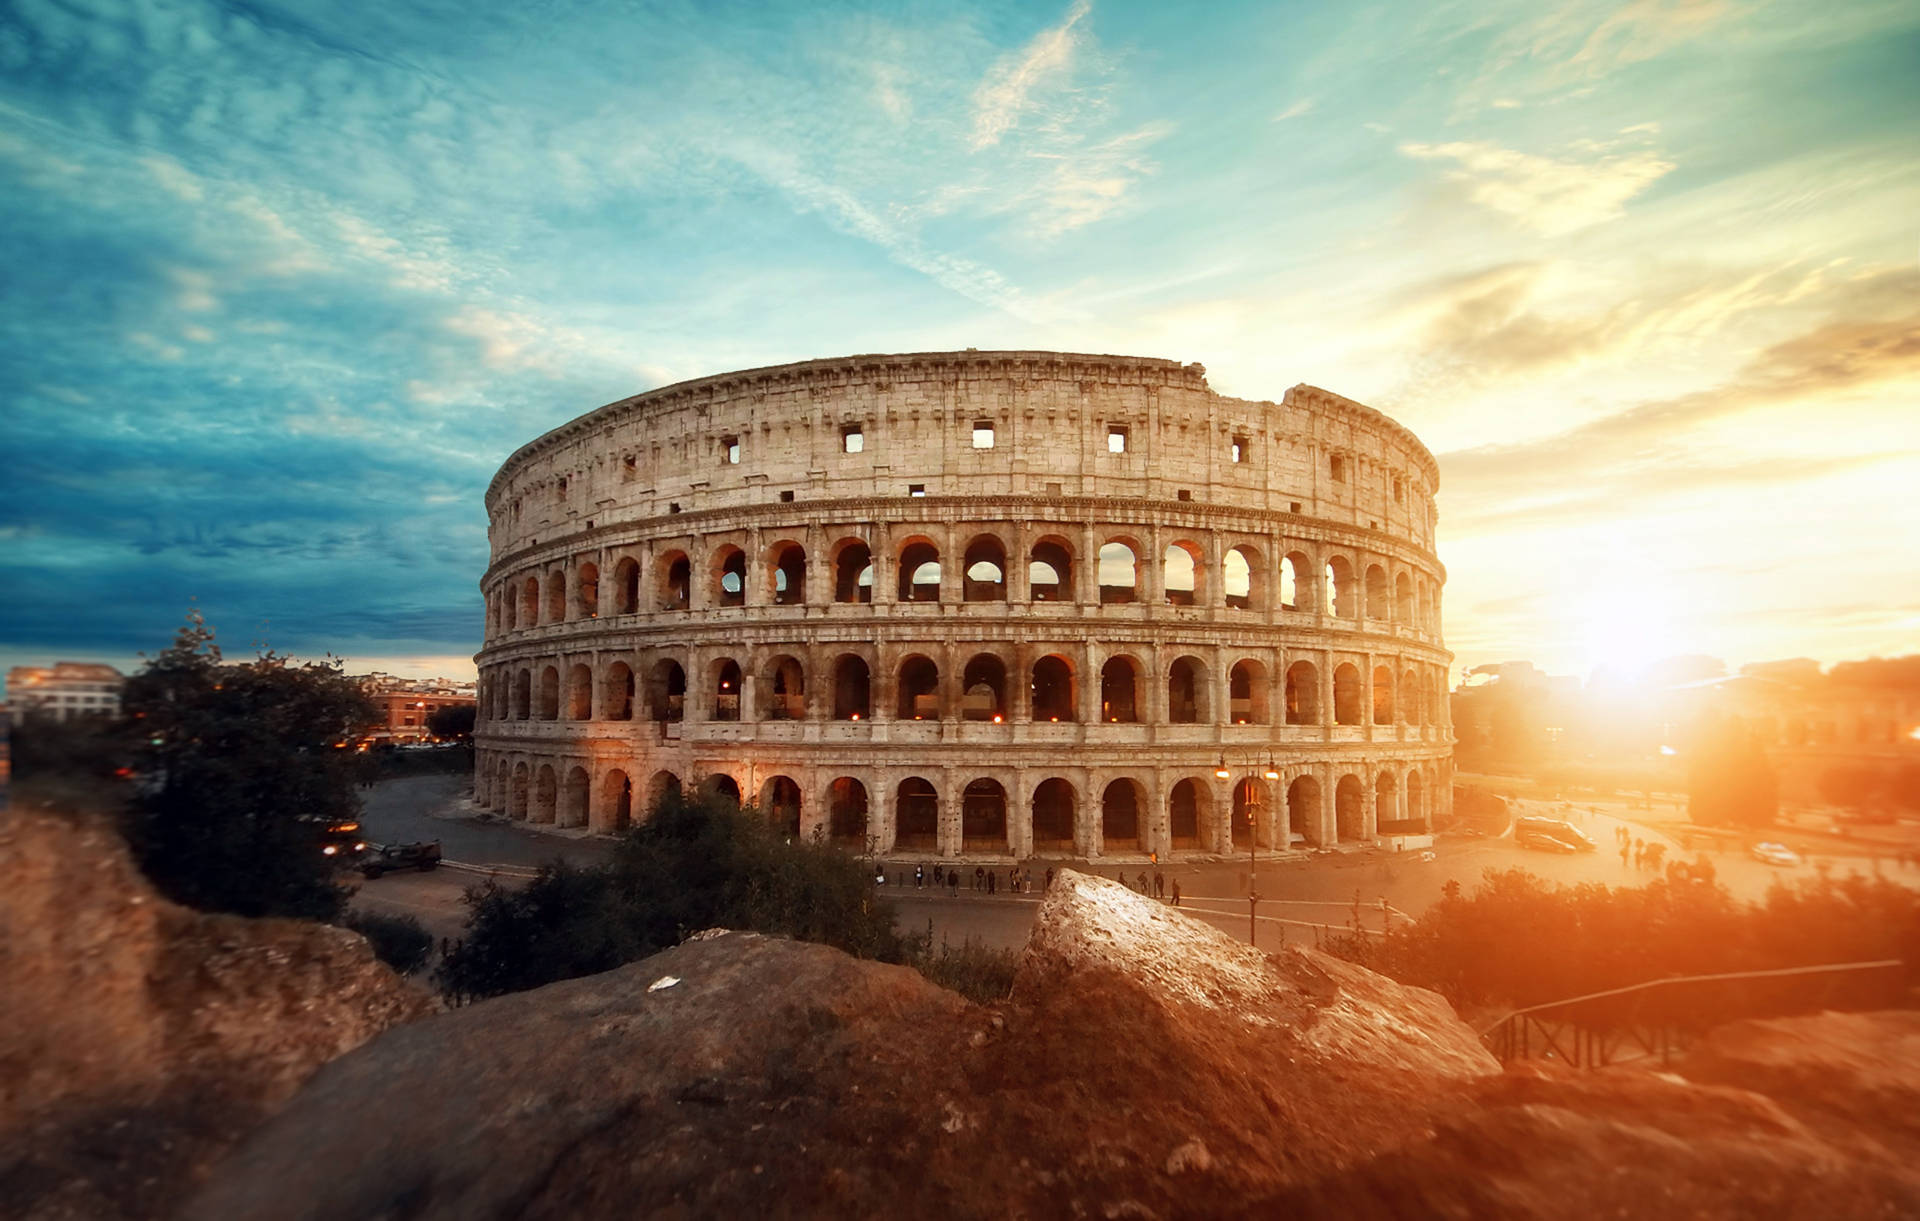 Colosseum With Beautiful And Blue Sky Overhead Wallpaper